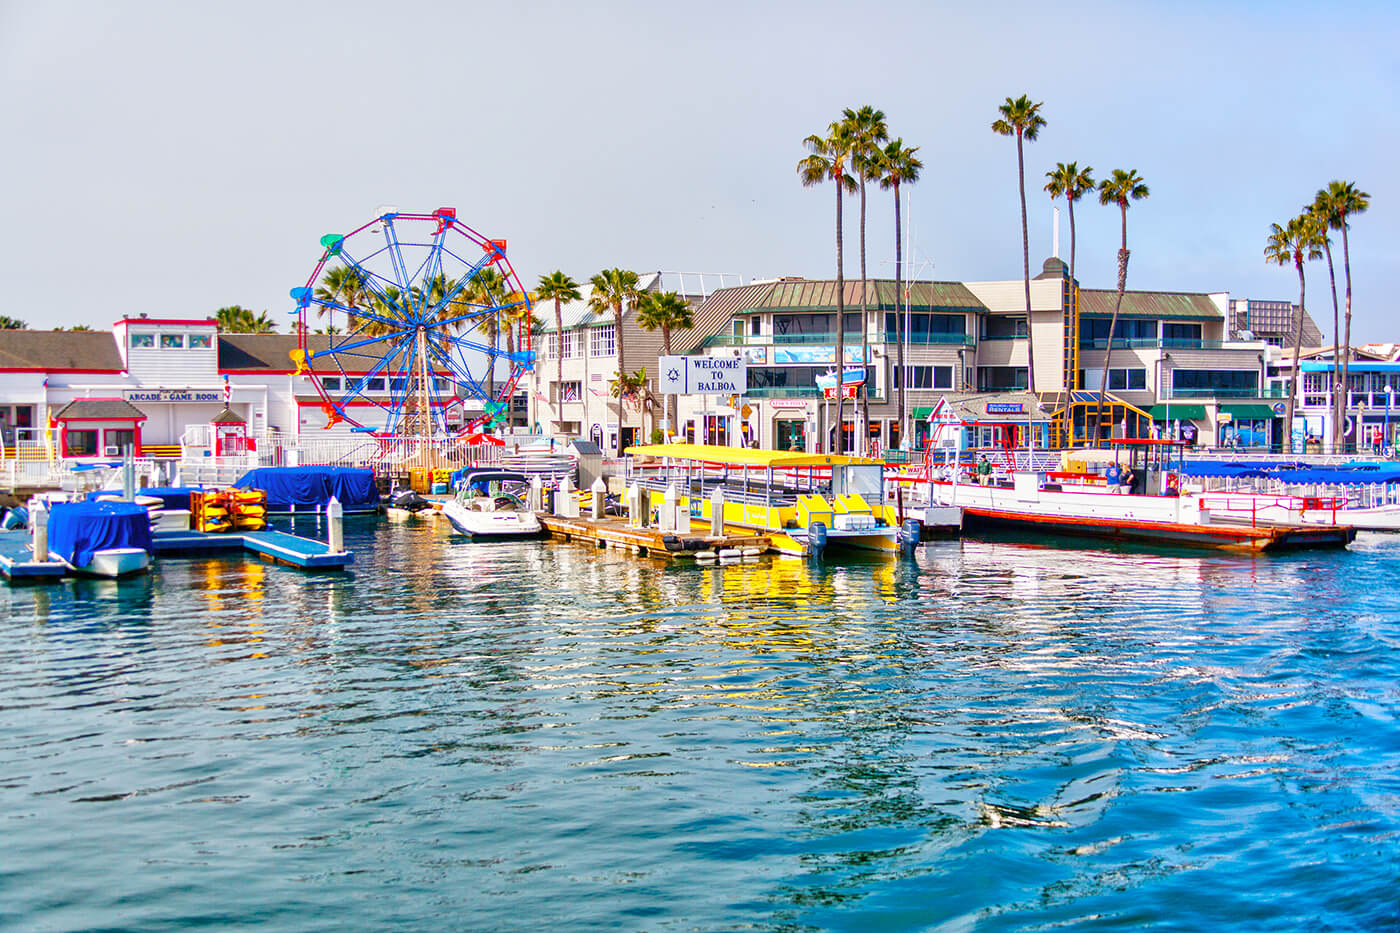 View of the amusement park at Newport Beach